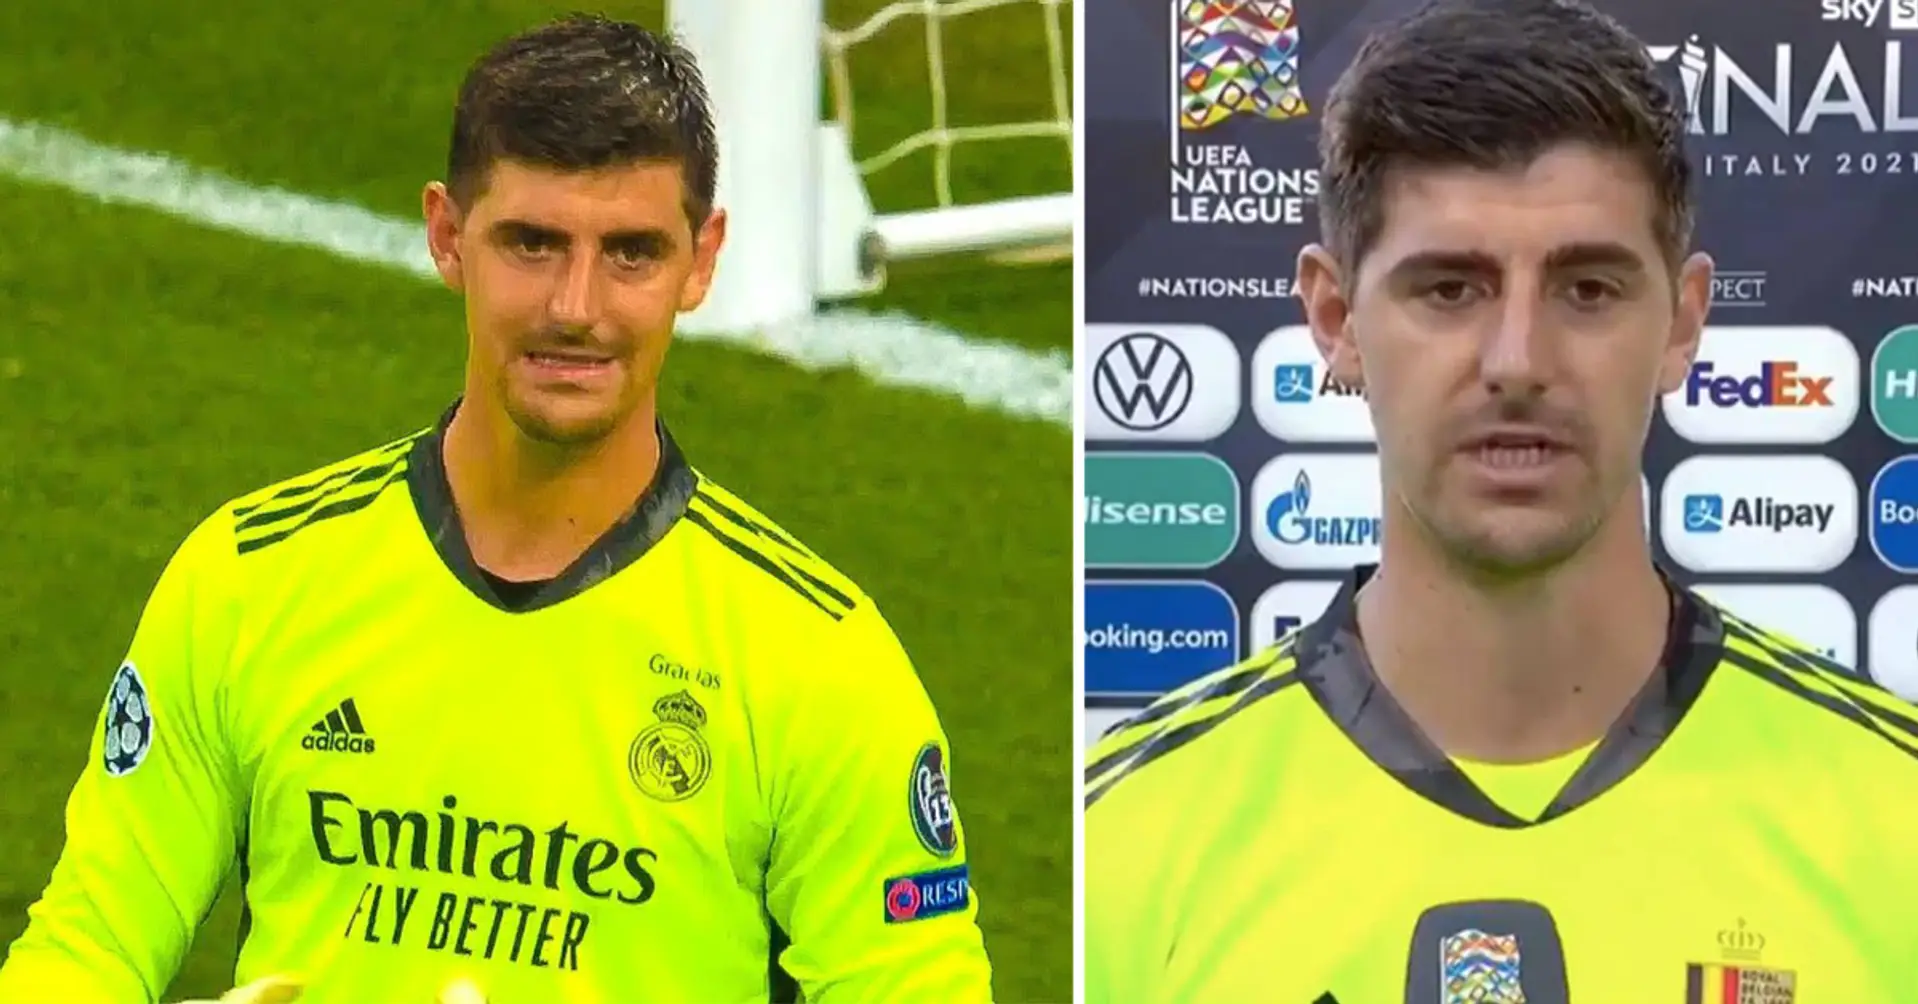 Thibaut Courtois unexpectedly attacks UEFA and FIFA after losing Nations League